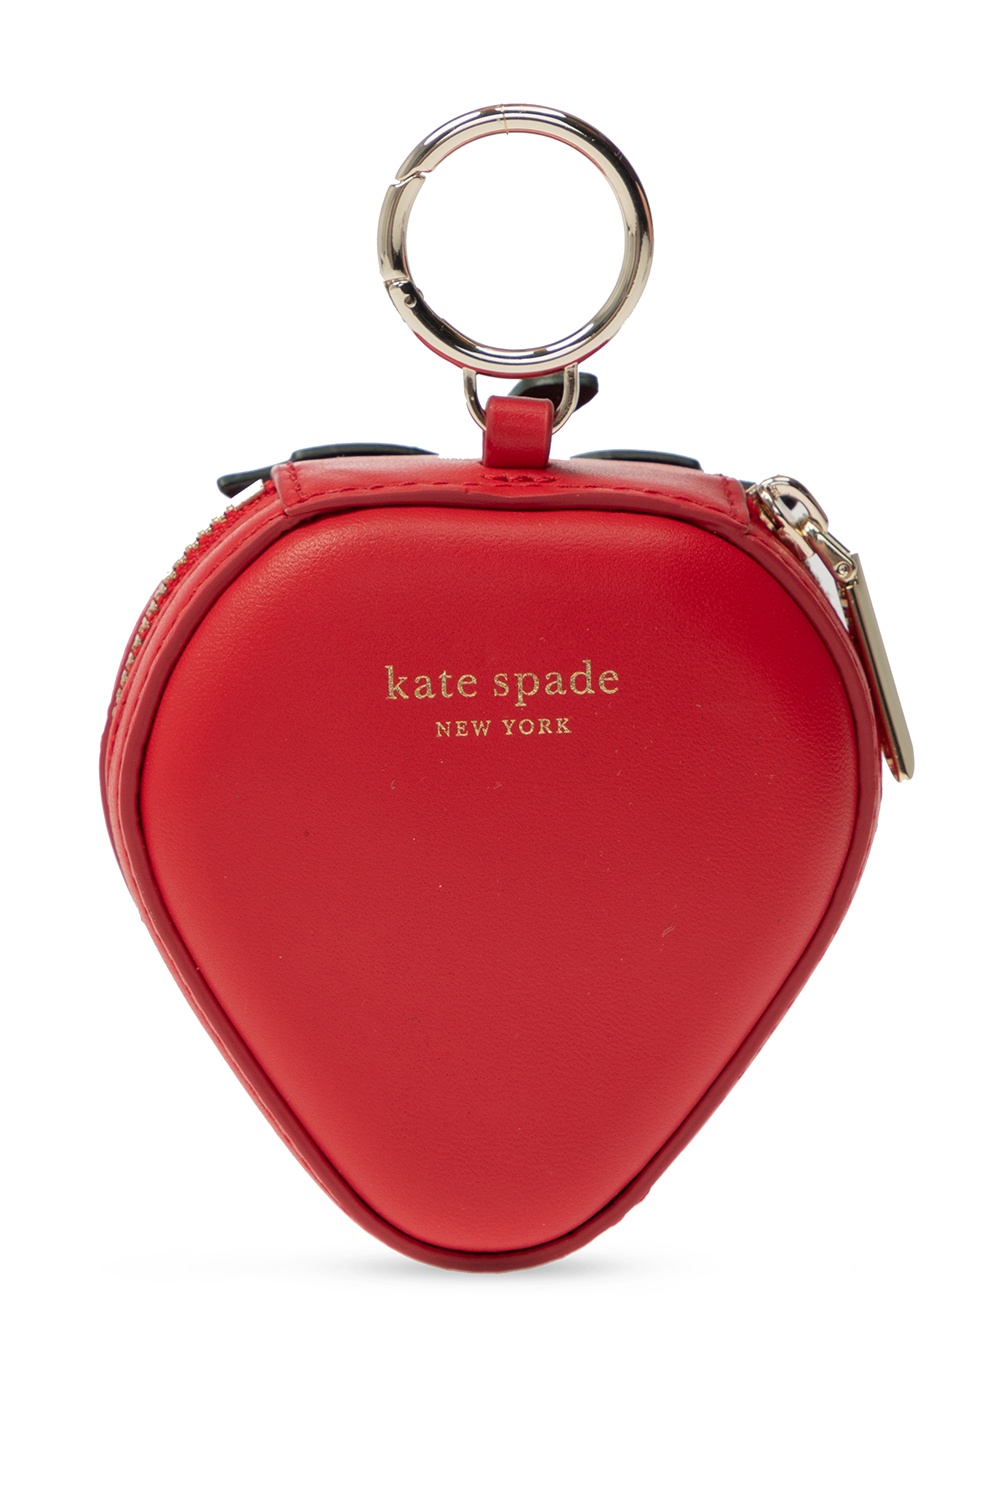 Kate Spade Strawberry coin purse keyring, Women's Accessories